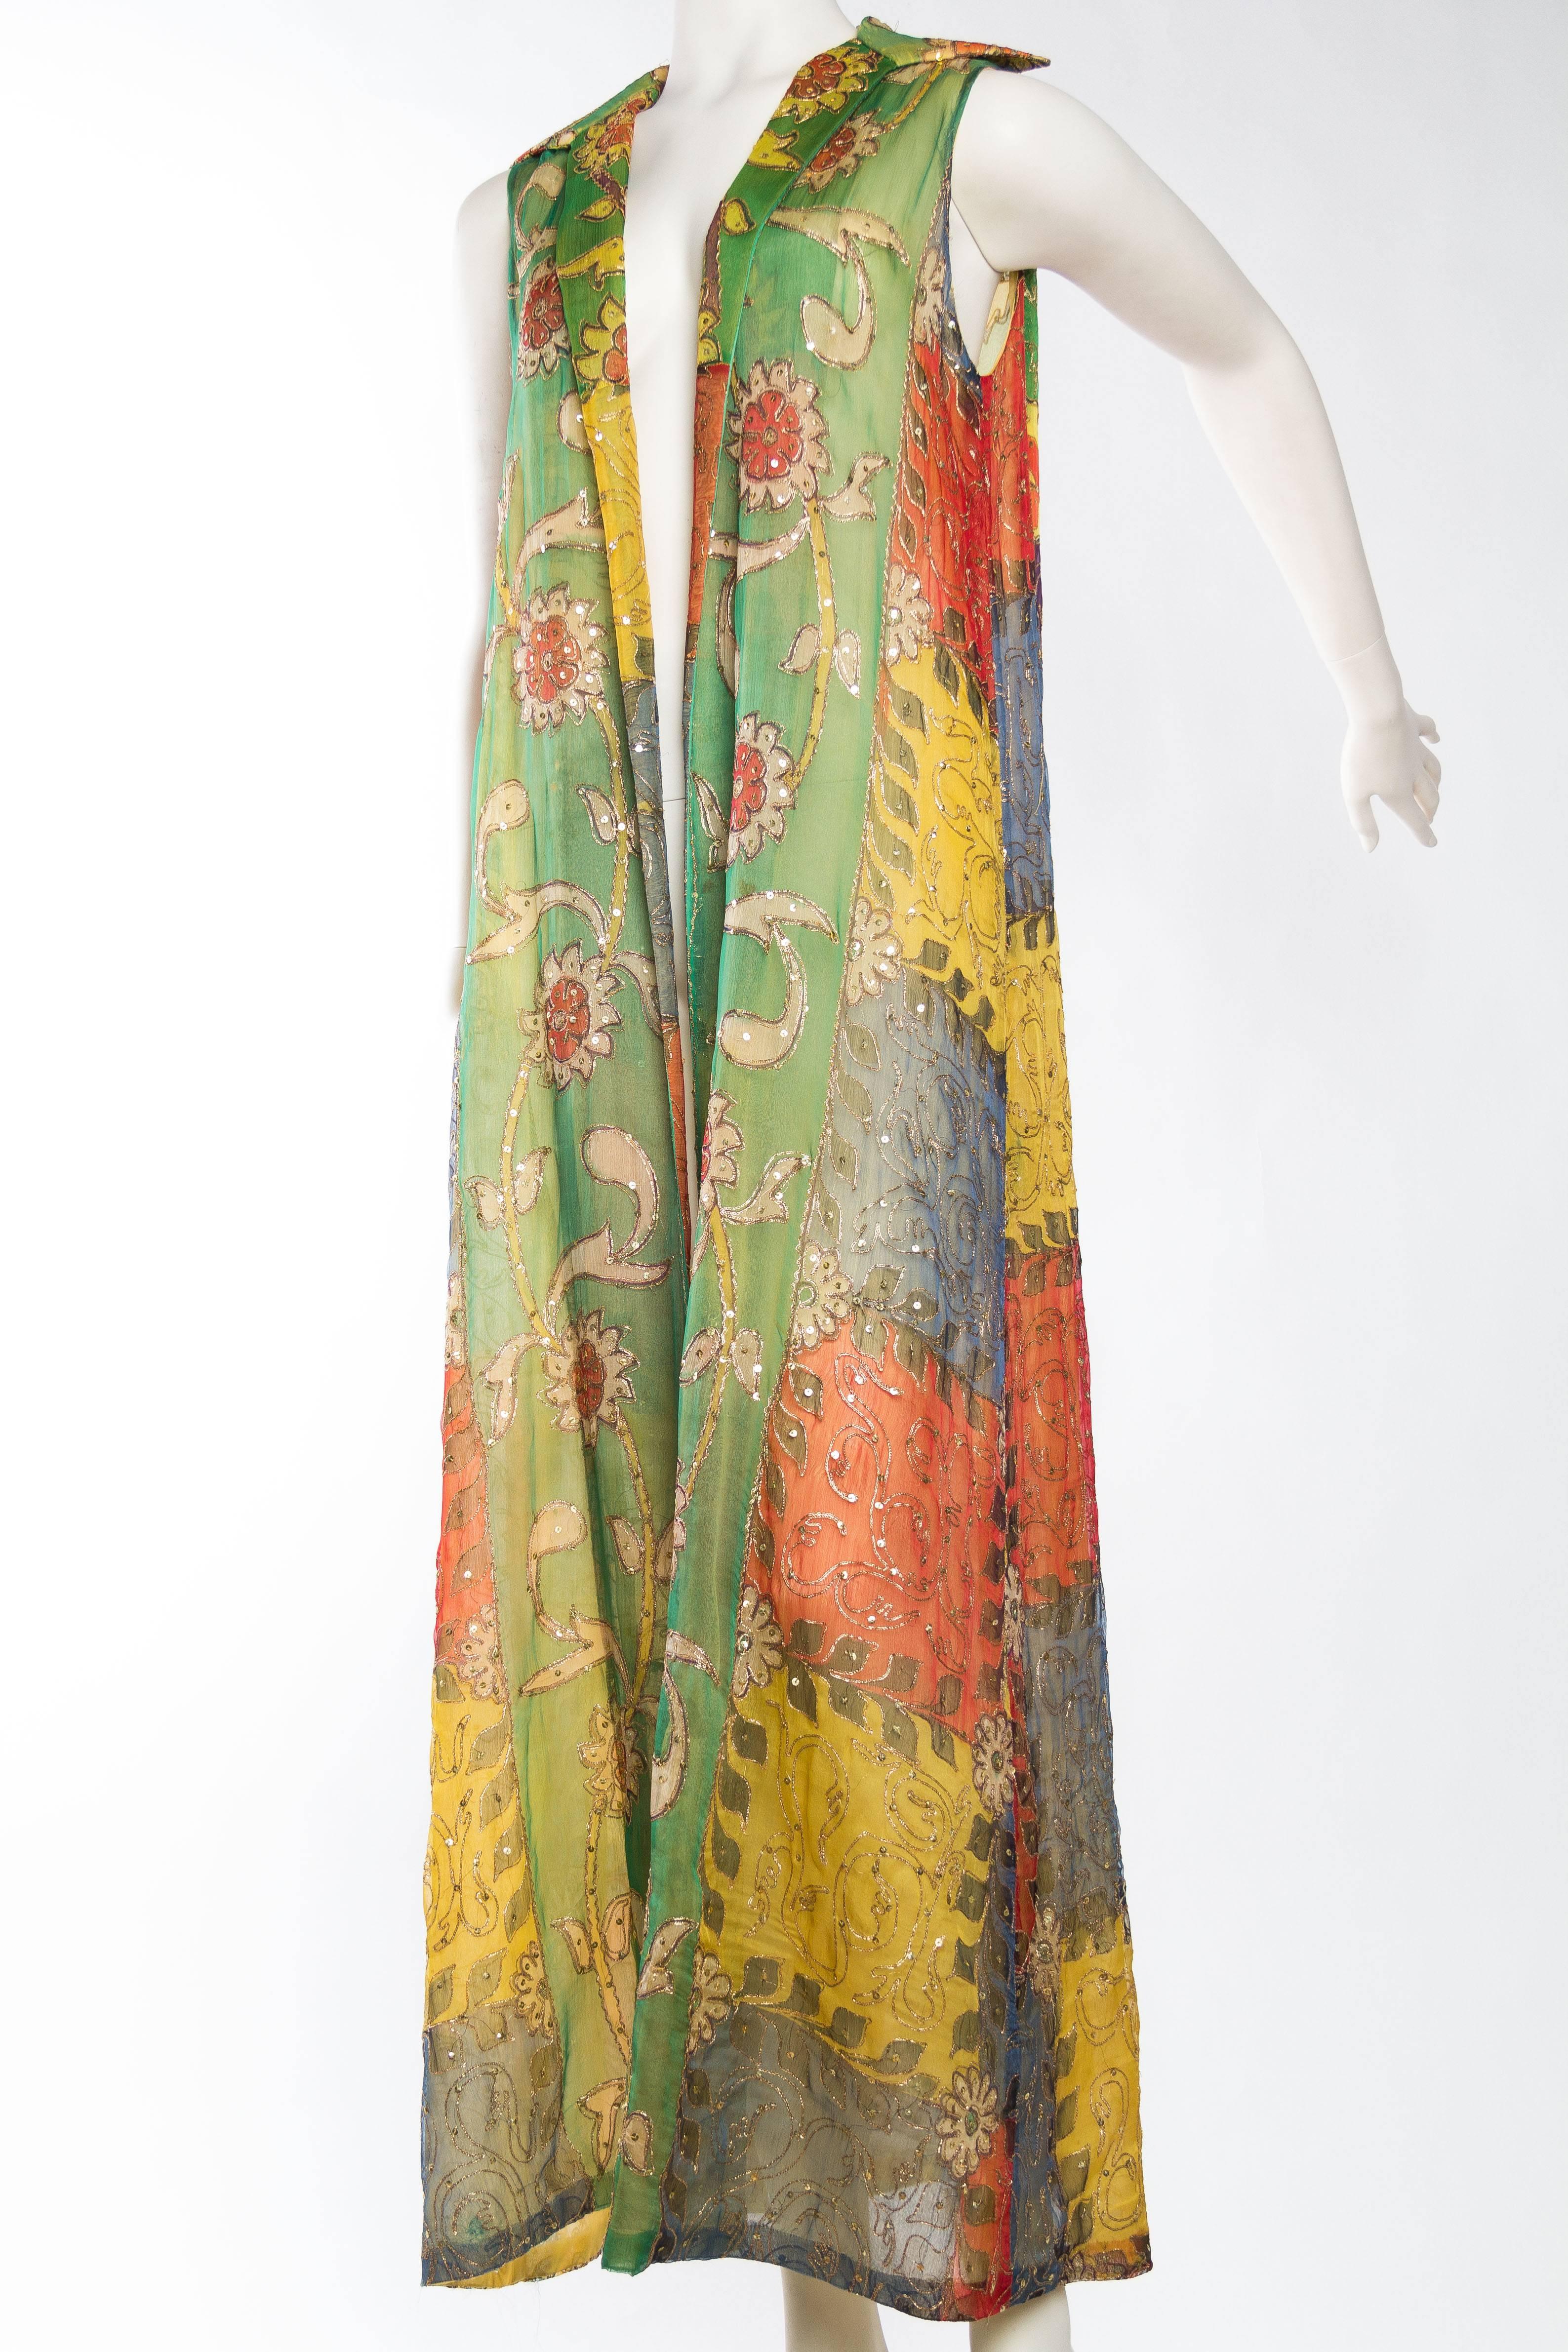 Hand Painted Silk Maxi Vest with Gold Embroidery in a Moroccan or Indian style.